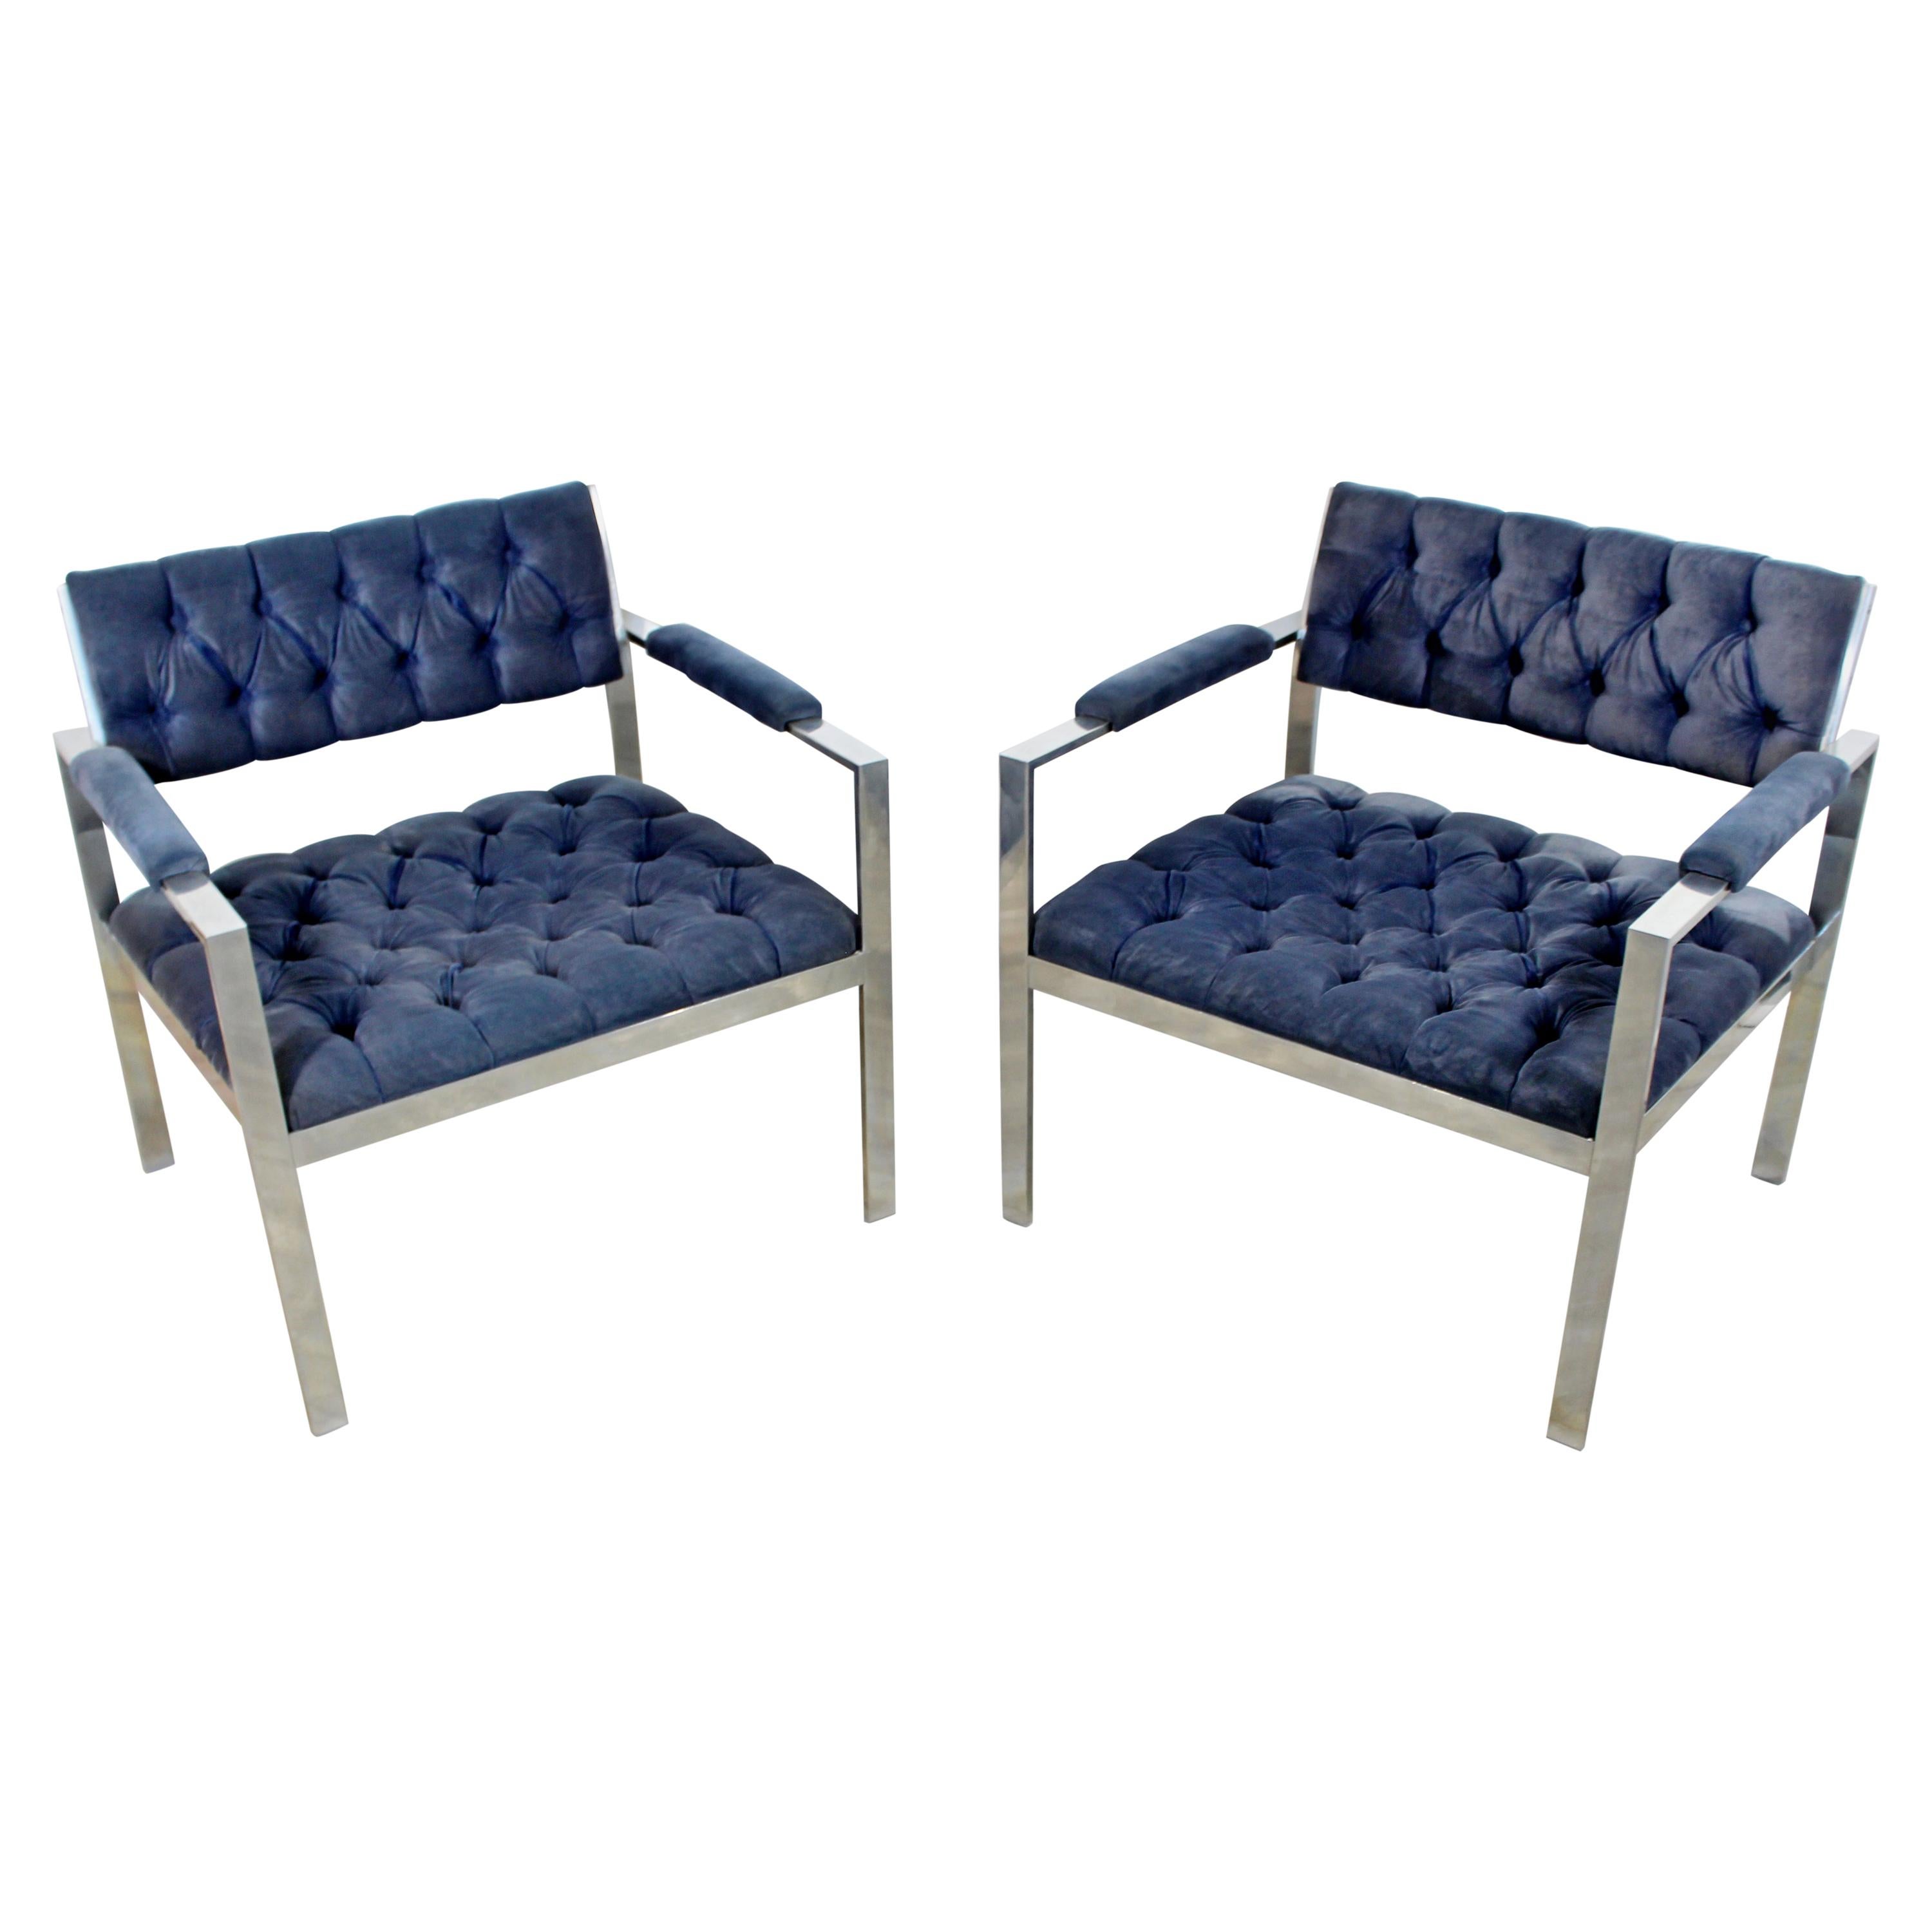 Mid-Century Modern Pair of Tufted Chrome Lounge Chairs Harvey Probber, 1970s